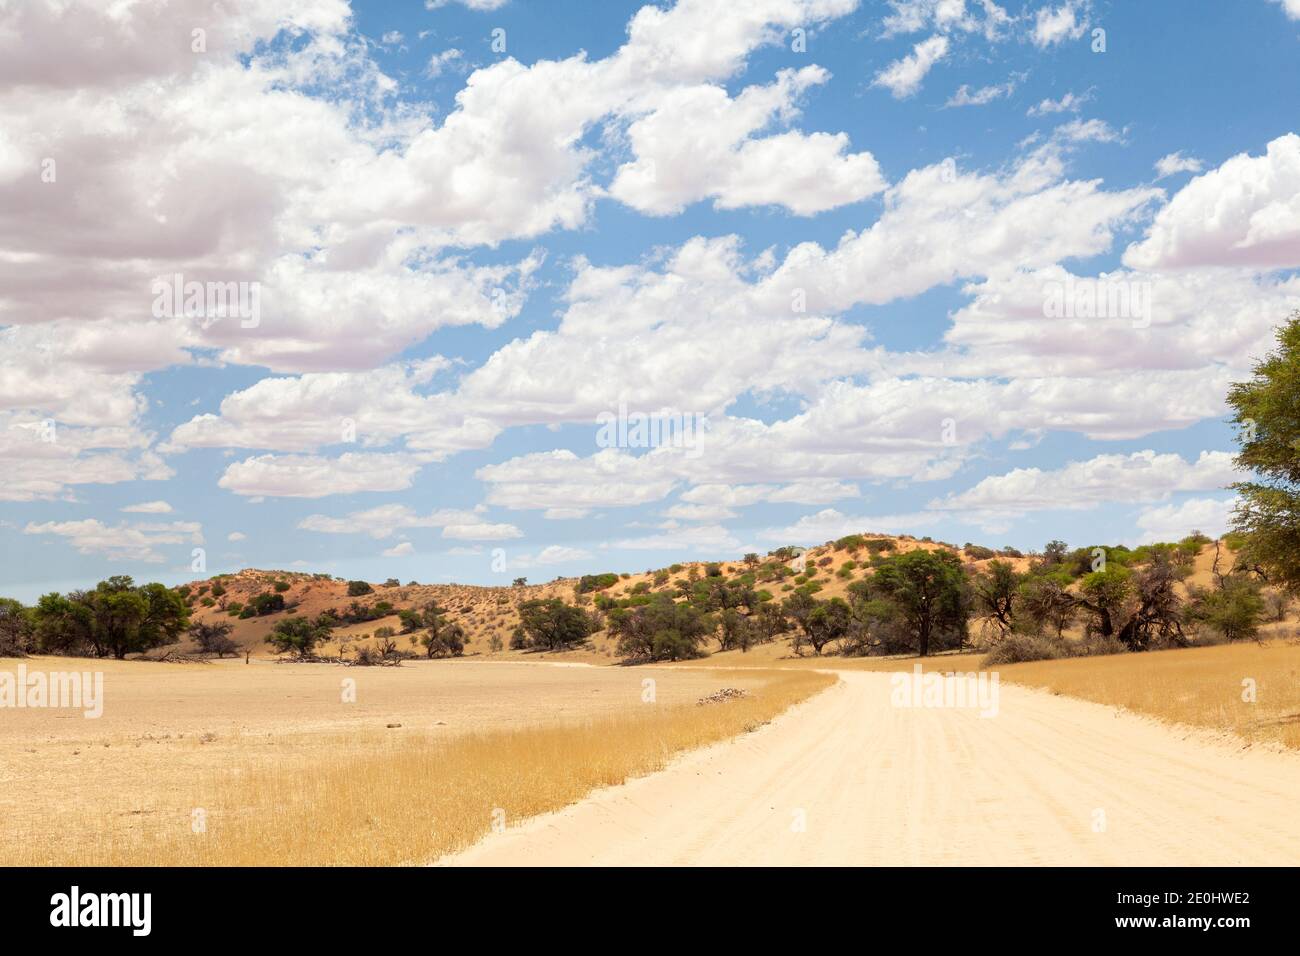 Sand road on the Auob River near Mata Mata, Kgalagadi Transfrontier Park, Kalahari, Northern Cape South Africa in a red dune landscape Stock Photo